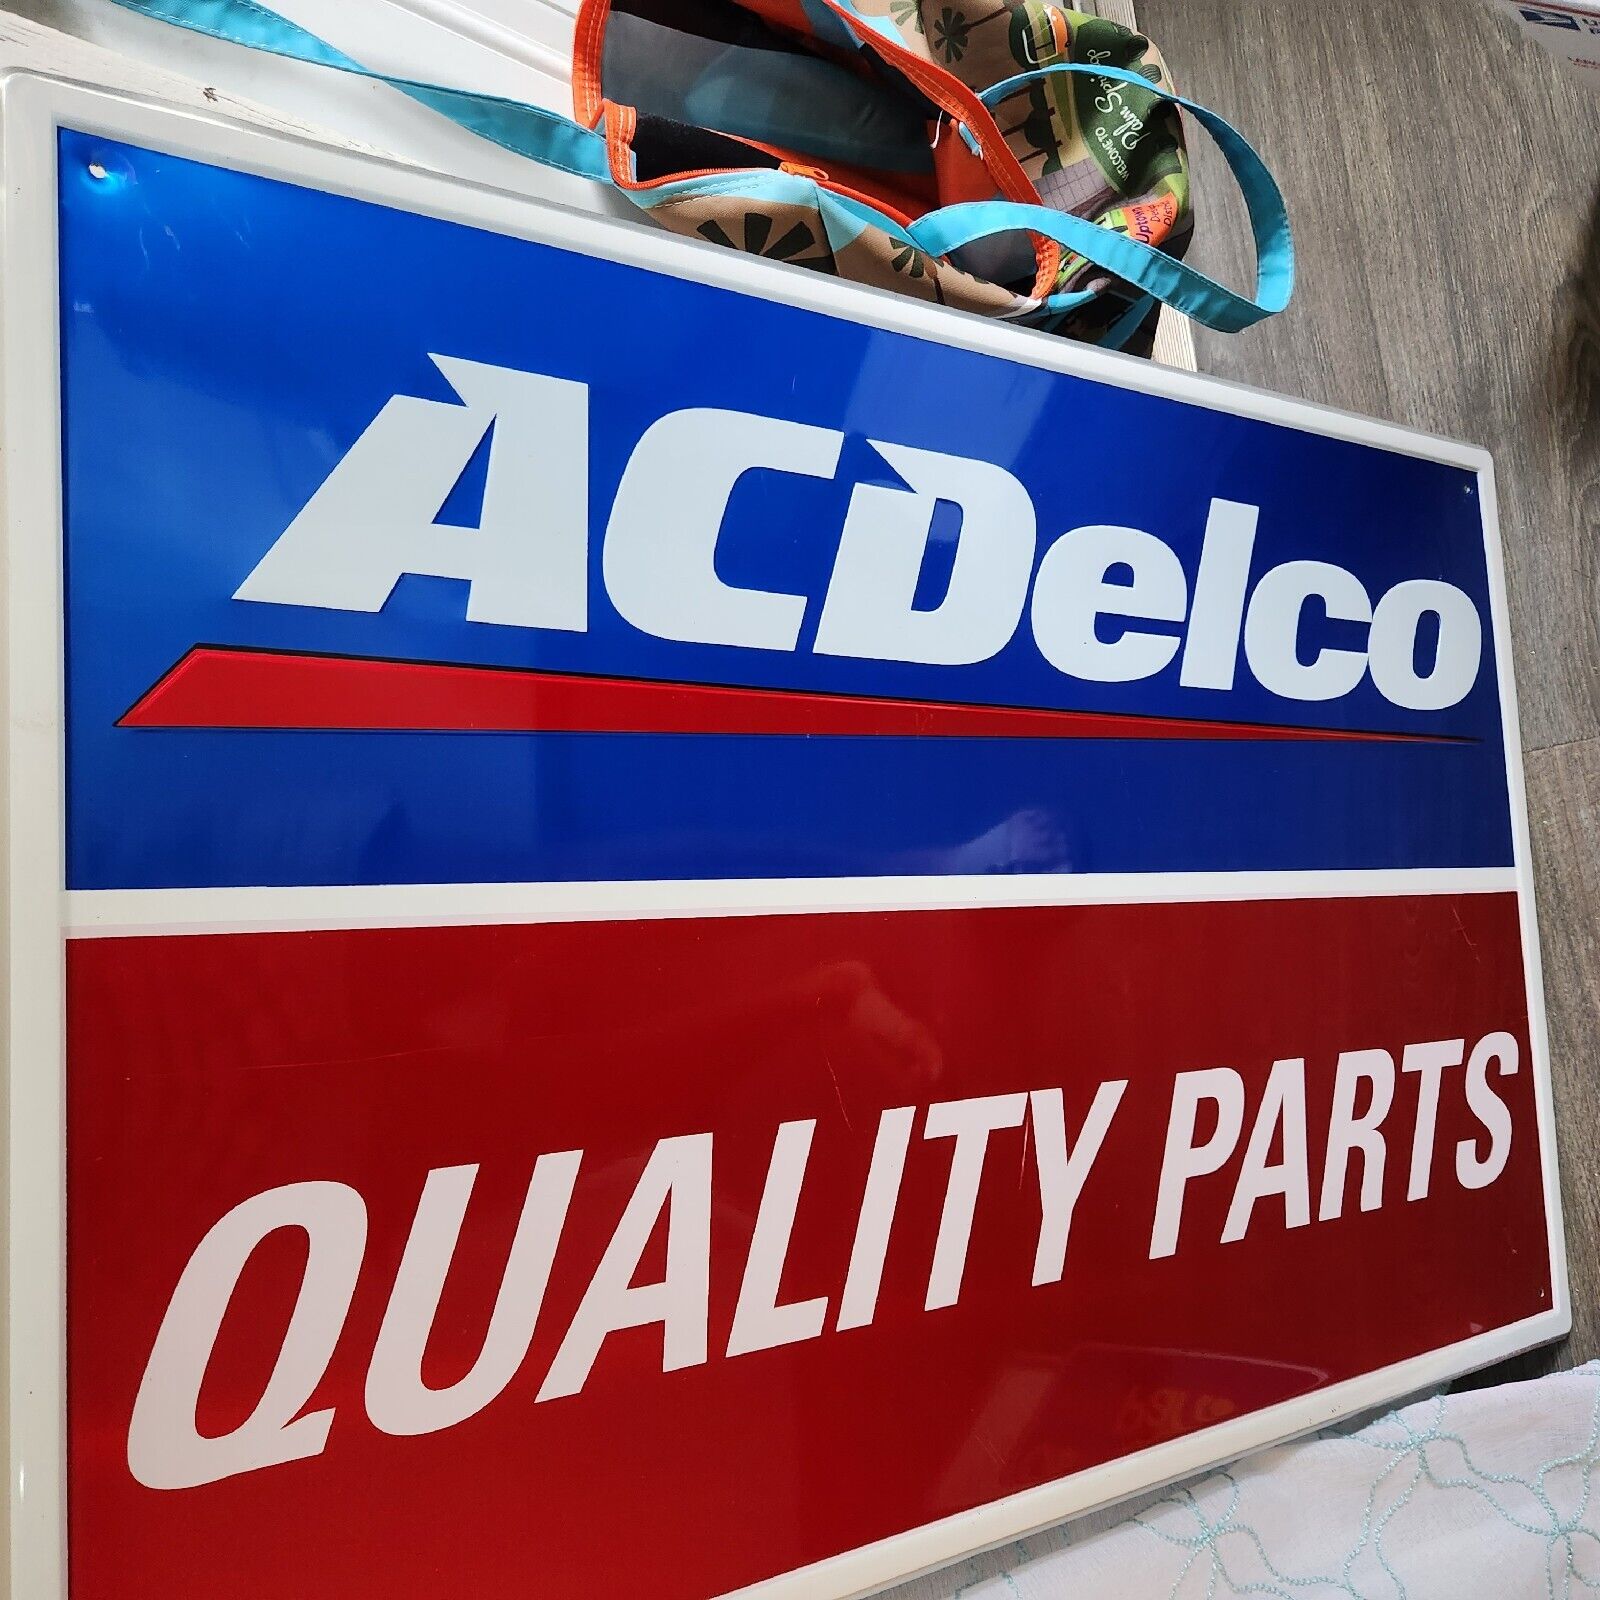 GM AC DELCO QUALITY PARTS SIGN SHOWROOM DEALERSHIP MAN CAVE GAS STATION OIL